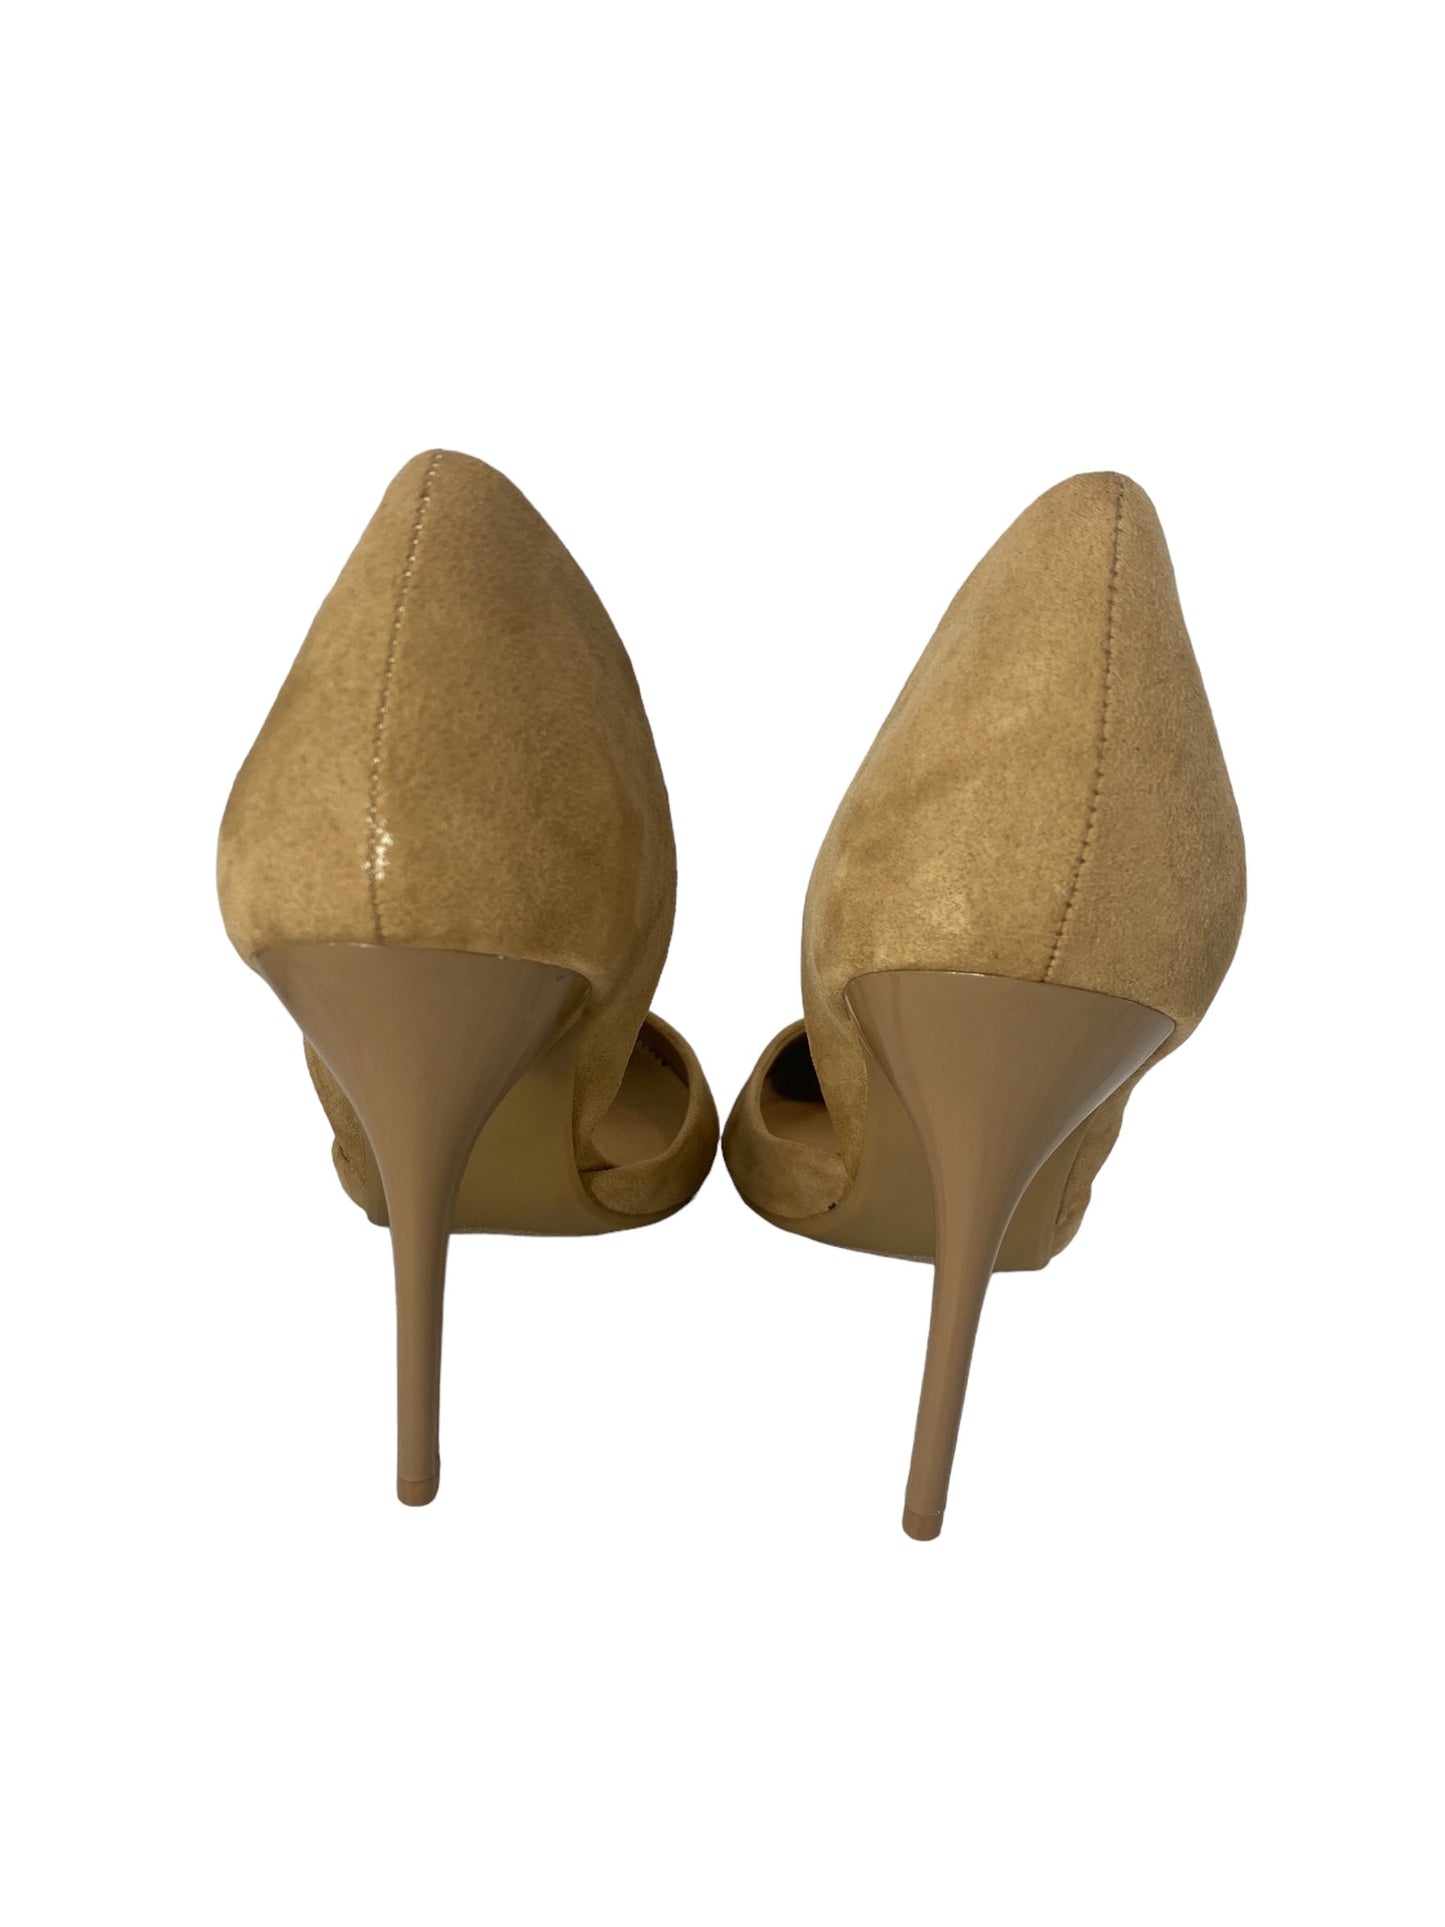 Tan Shoes Heels Stiletto Just Fab, Size 8.5